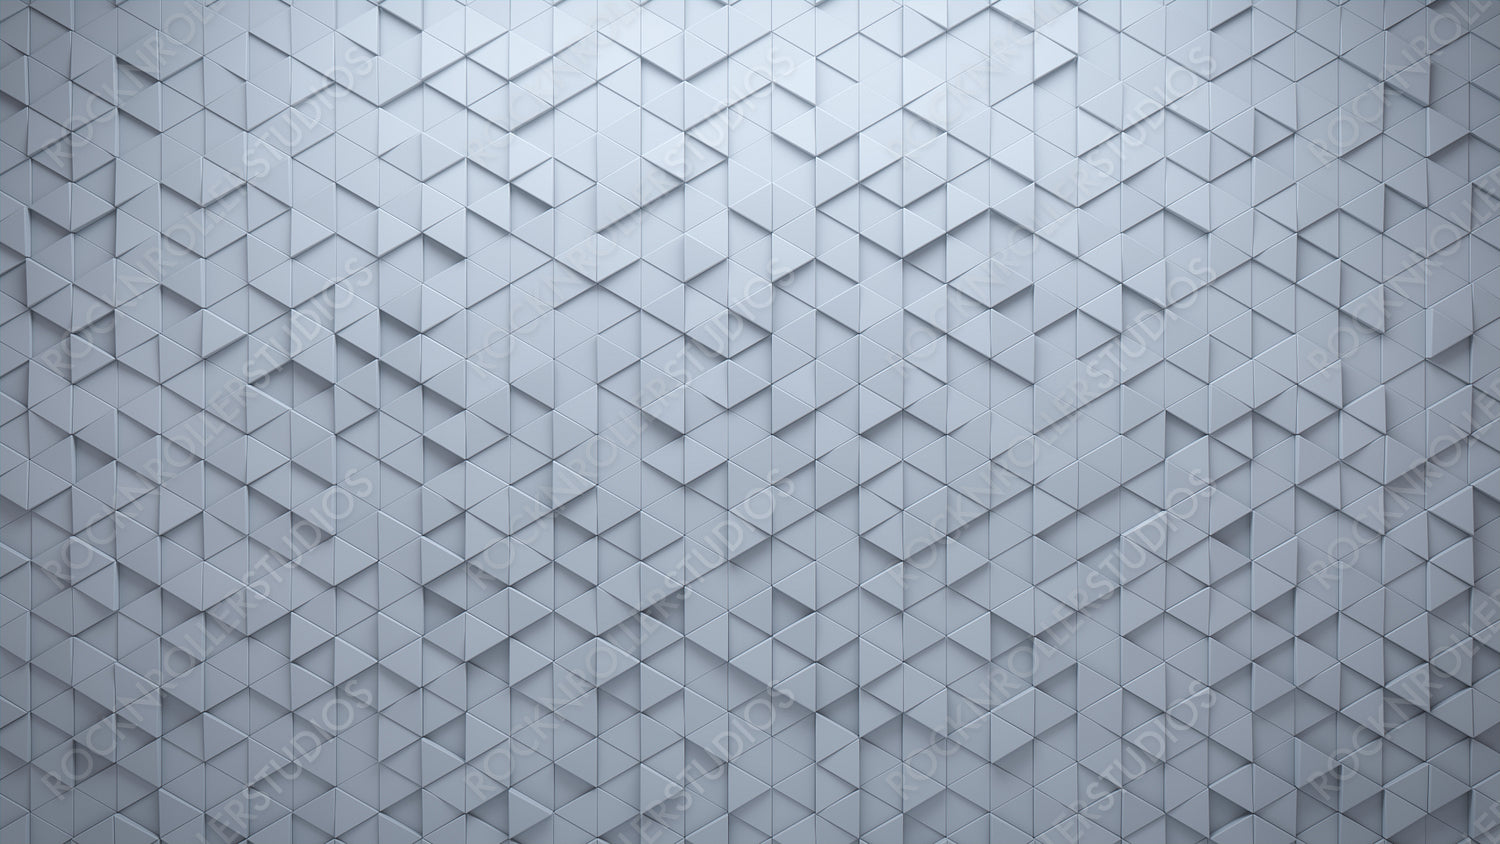 Polished, White Wall background with tiles. 3D, tile Wallpaper with Futuristic, Triangular blocks. 3D Render